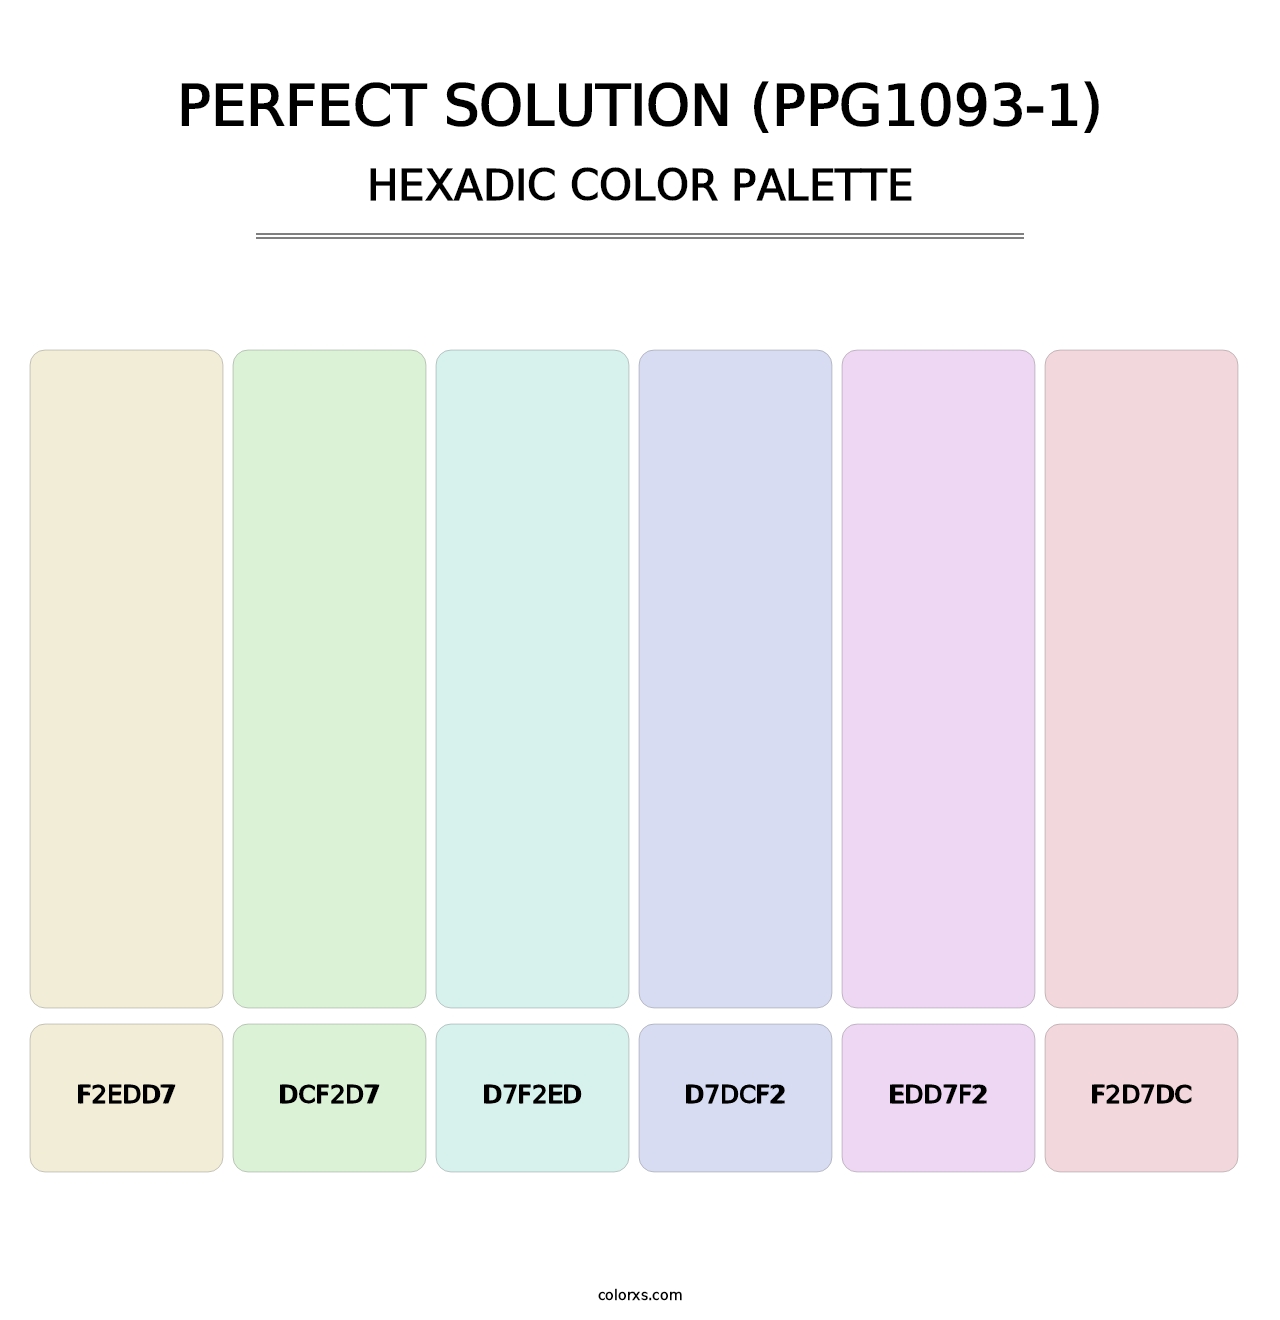 Perfect Solution (PPG1093-1) - Hexadic Color Palette